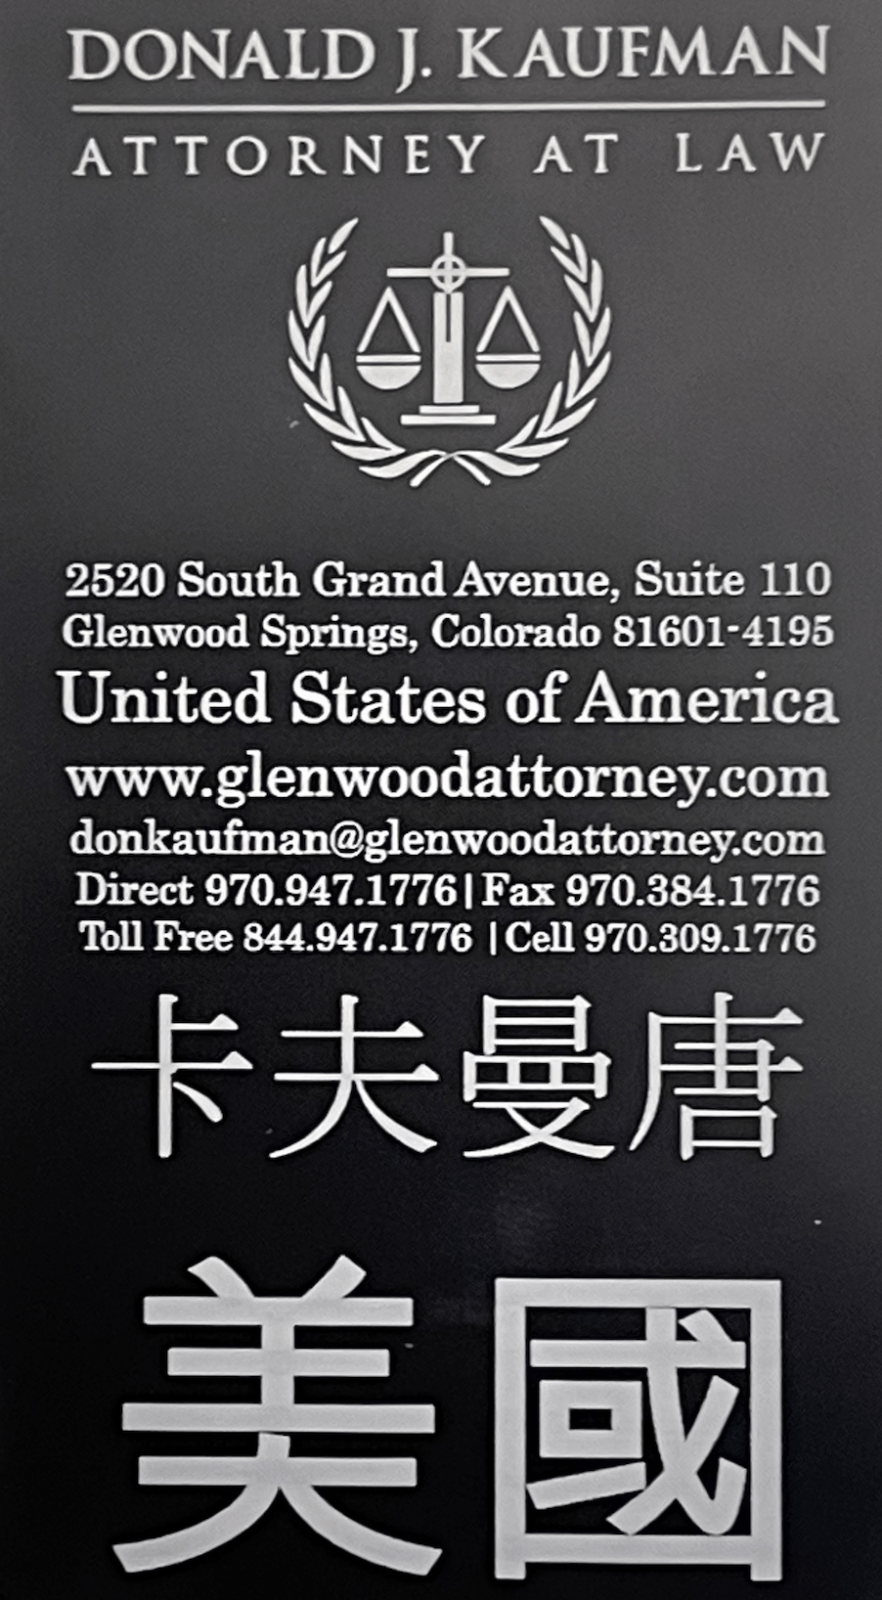 Donald J. Kaufman Attorney at Law Contact Info Page